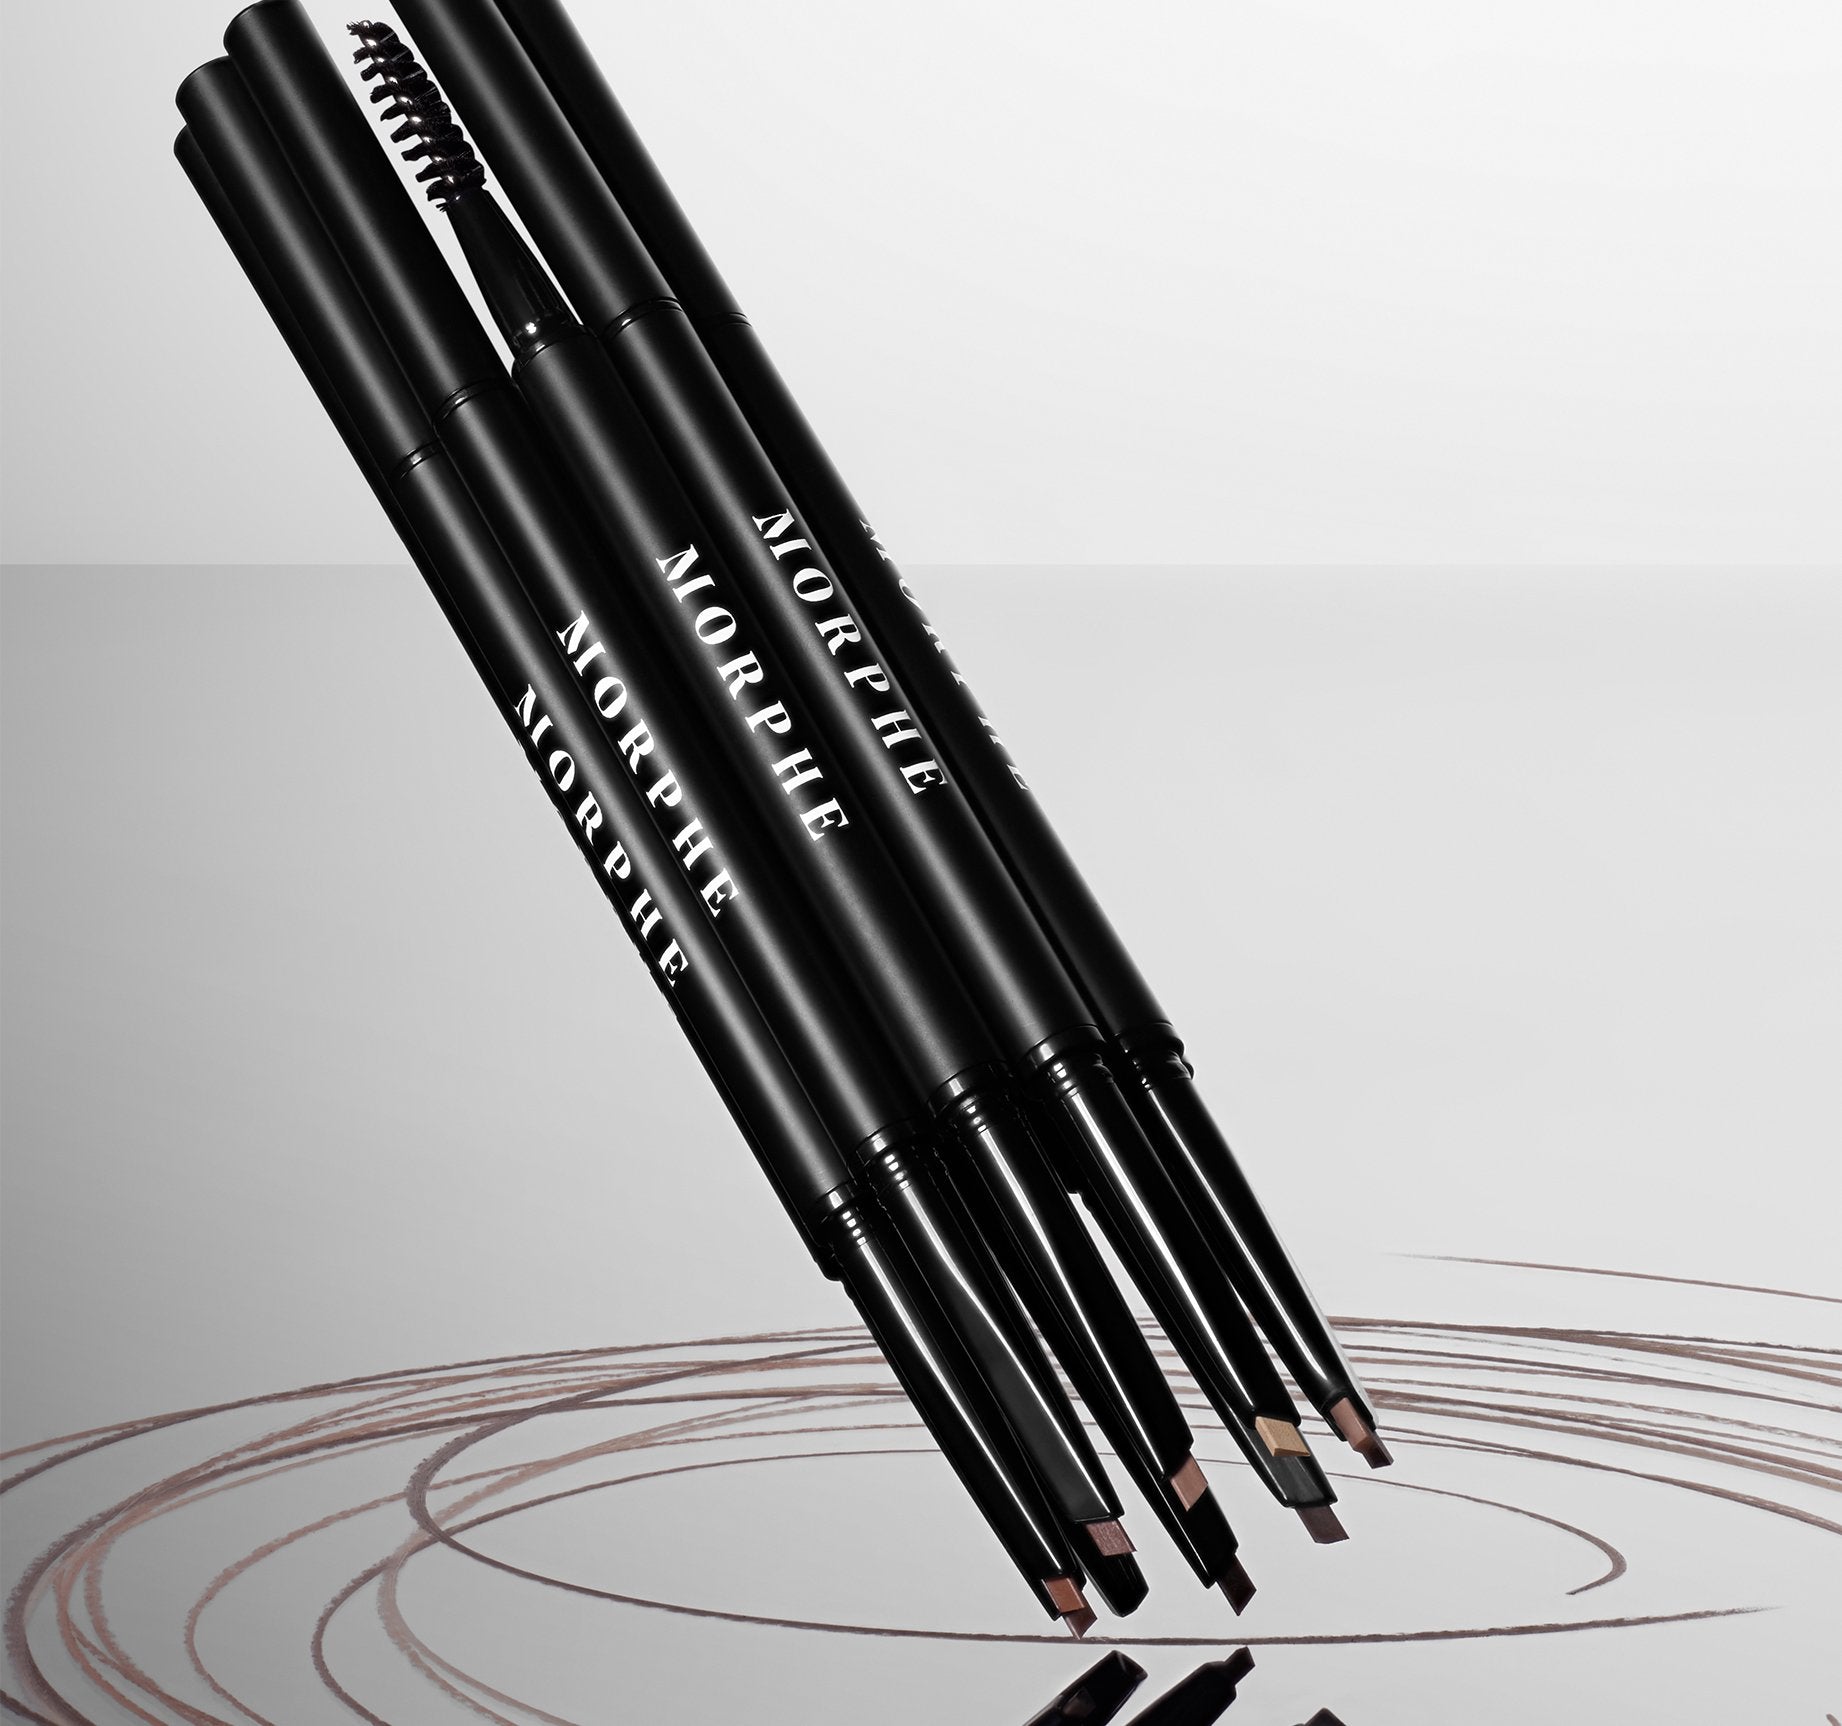 Definer Dual-Ended Brow Pencil & Spoolie - Chocolate Mousse - Image 11